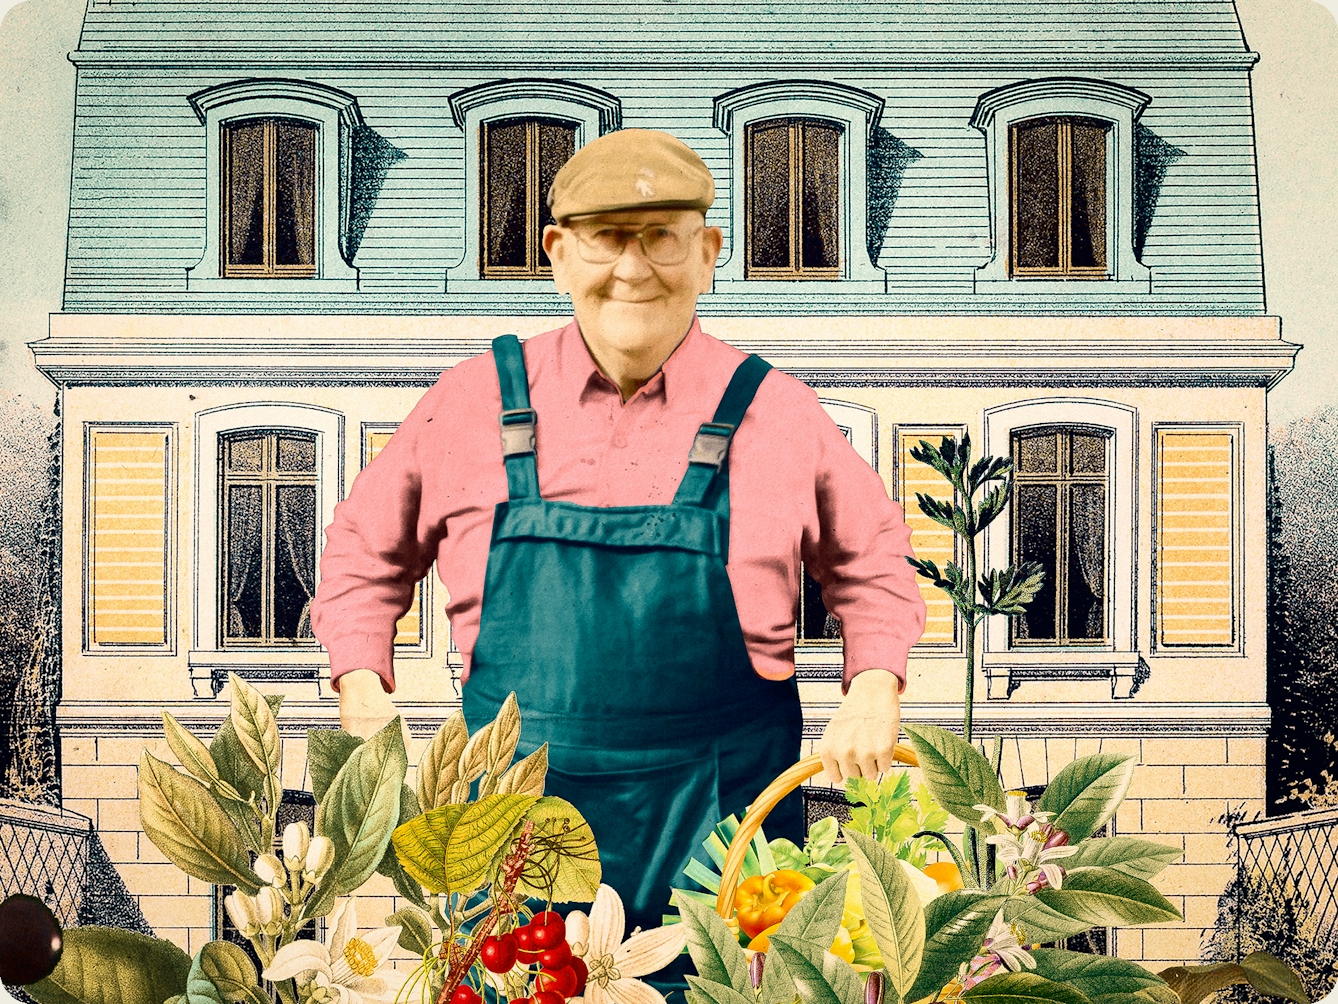 Detail from a larger mixed media digital artwork combining found imagery from vintage magazines and books with painted and textured elements. The overall hues are light blues, pinks, creams, greens and yellows. At the centre of the artwork is a photograph of an older man wearing glasses in a flat cap, smiling towards the viewer. He is wearing a pair of blue dungarees and a pink long sleeve collared shirt. Below and in front of his legs is a great collage of fruit and vegetables, flowers and leaves. Behind him in the background is a drawing of a three-storey home. The top floor is in the tiled roof which is tinted blue.